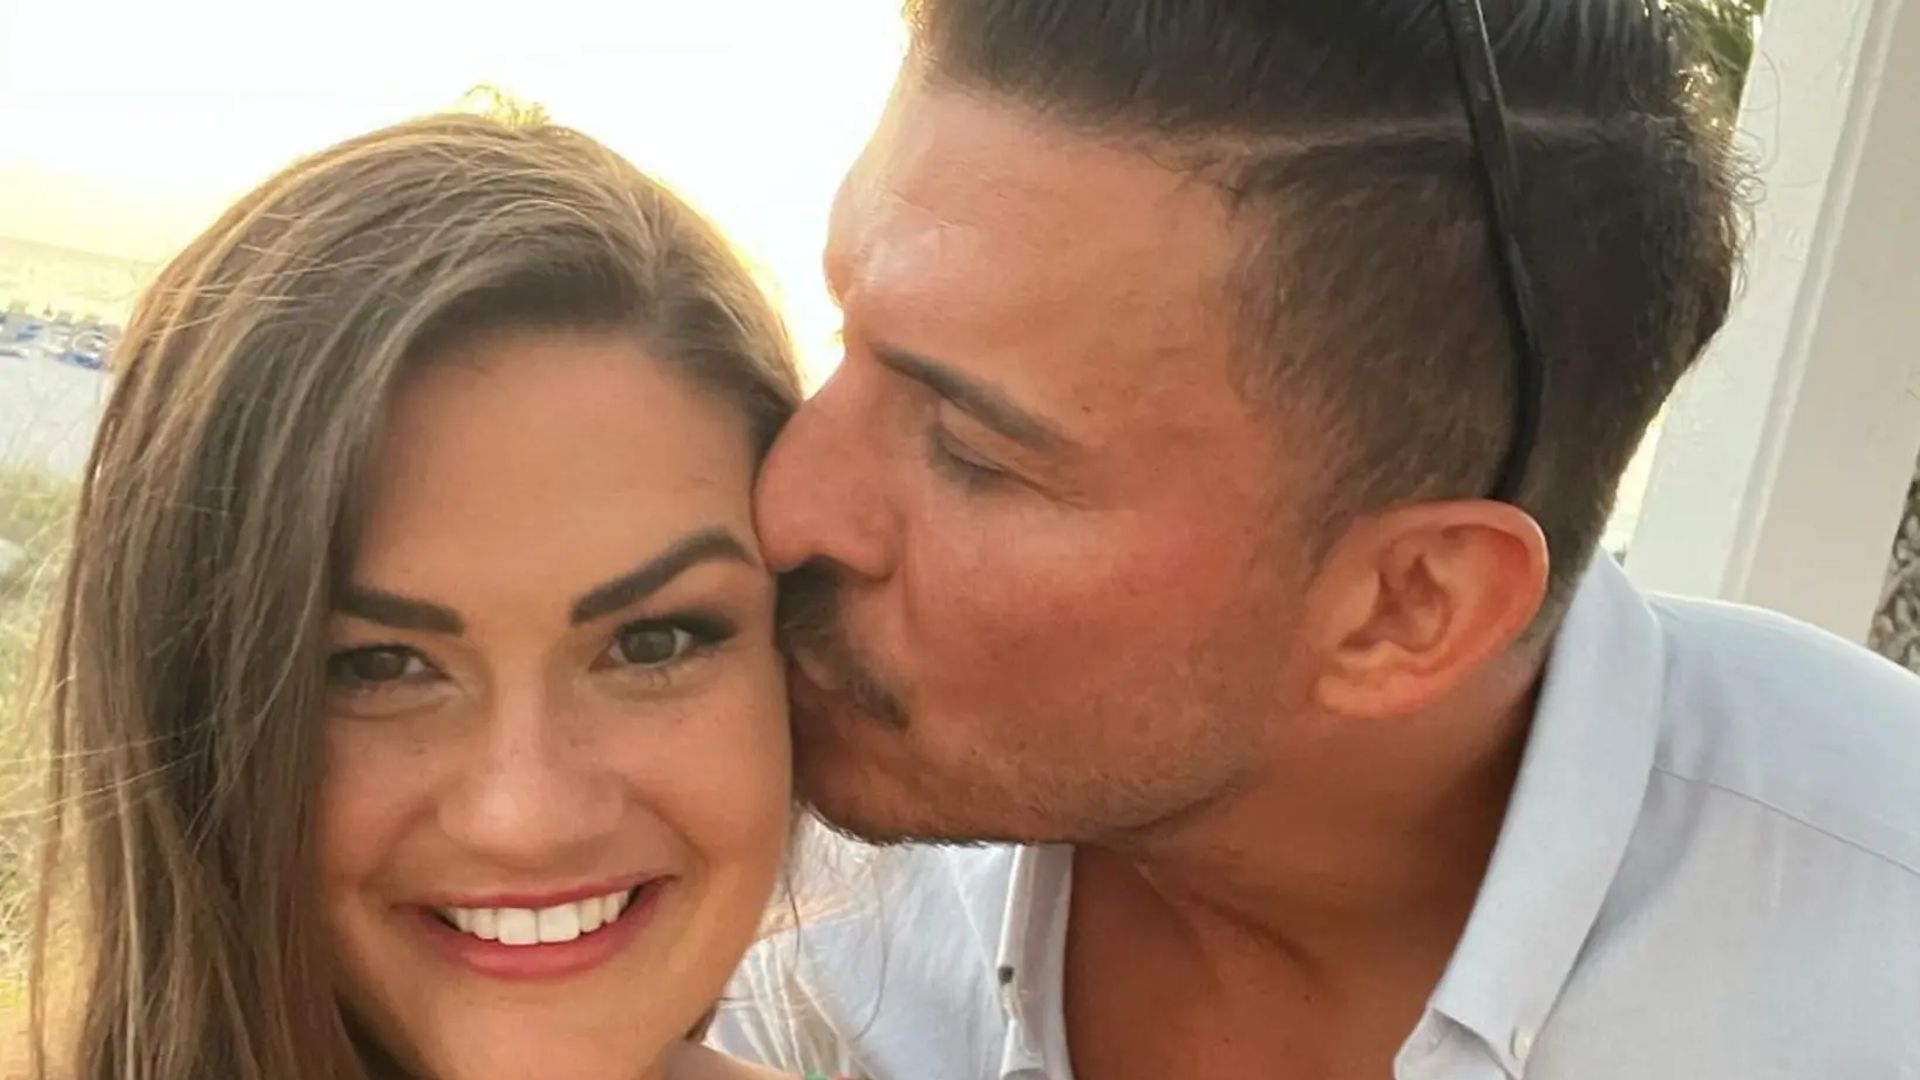 Jax Taylor reveals he’s ‘working’ to get ex Brittany Cartwright back following split